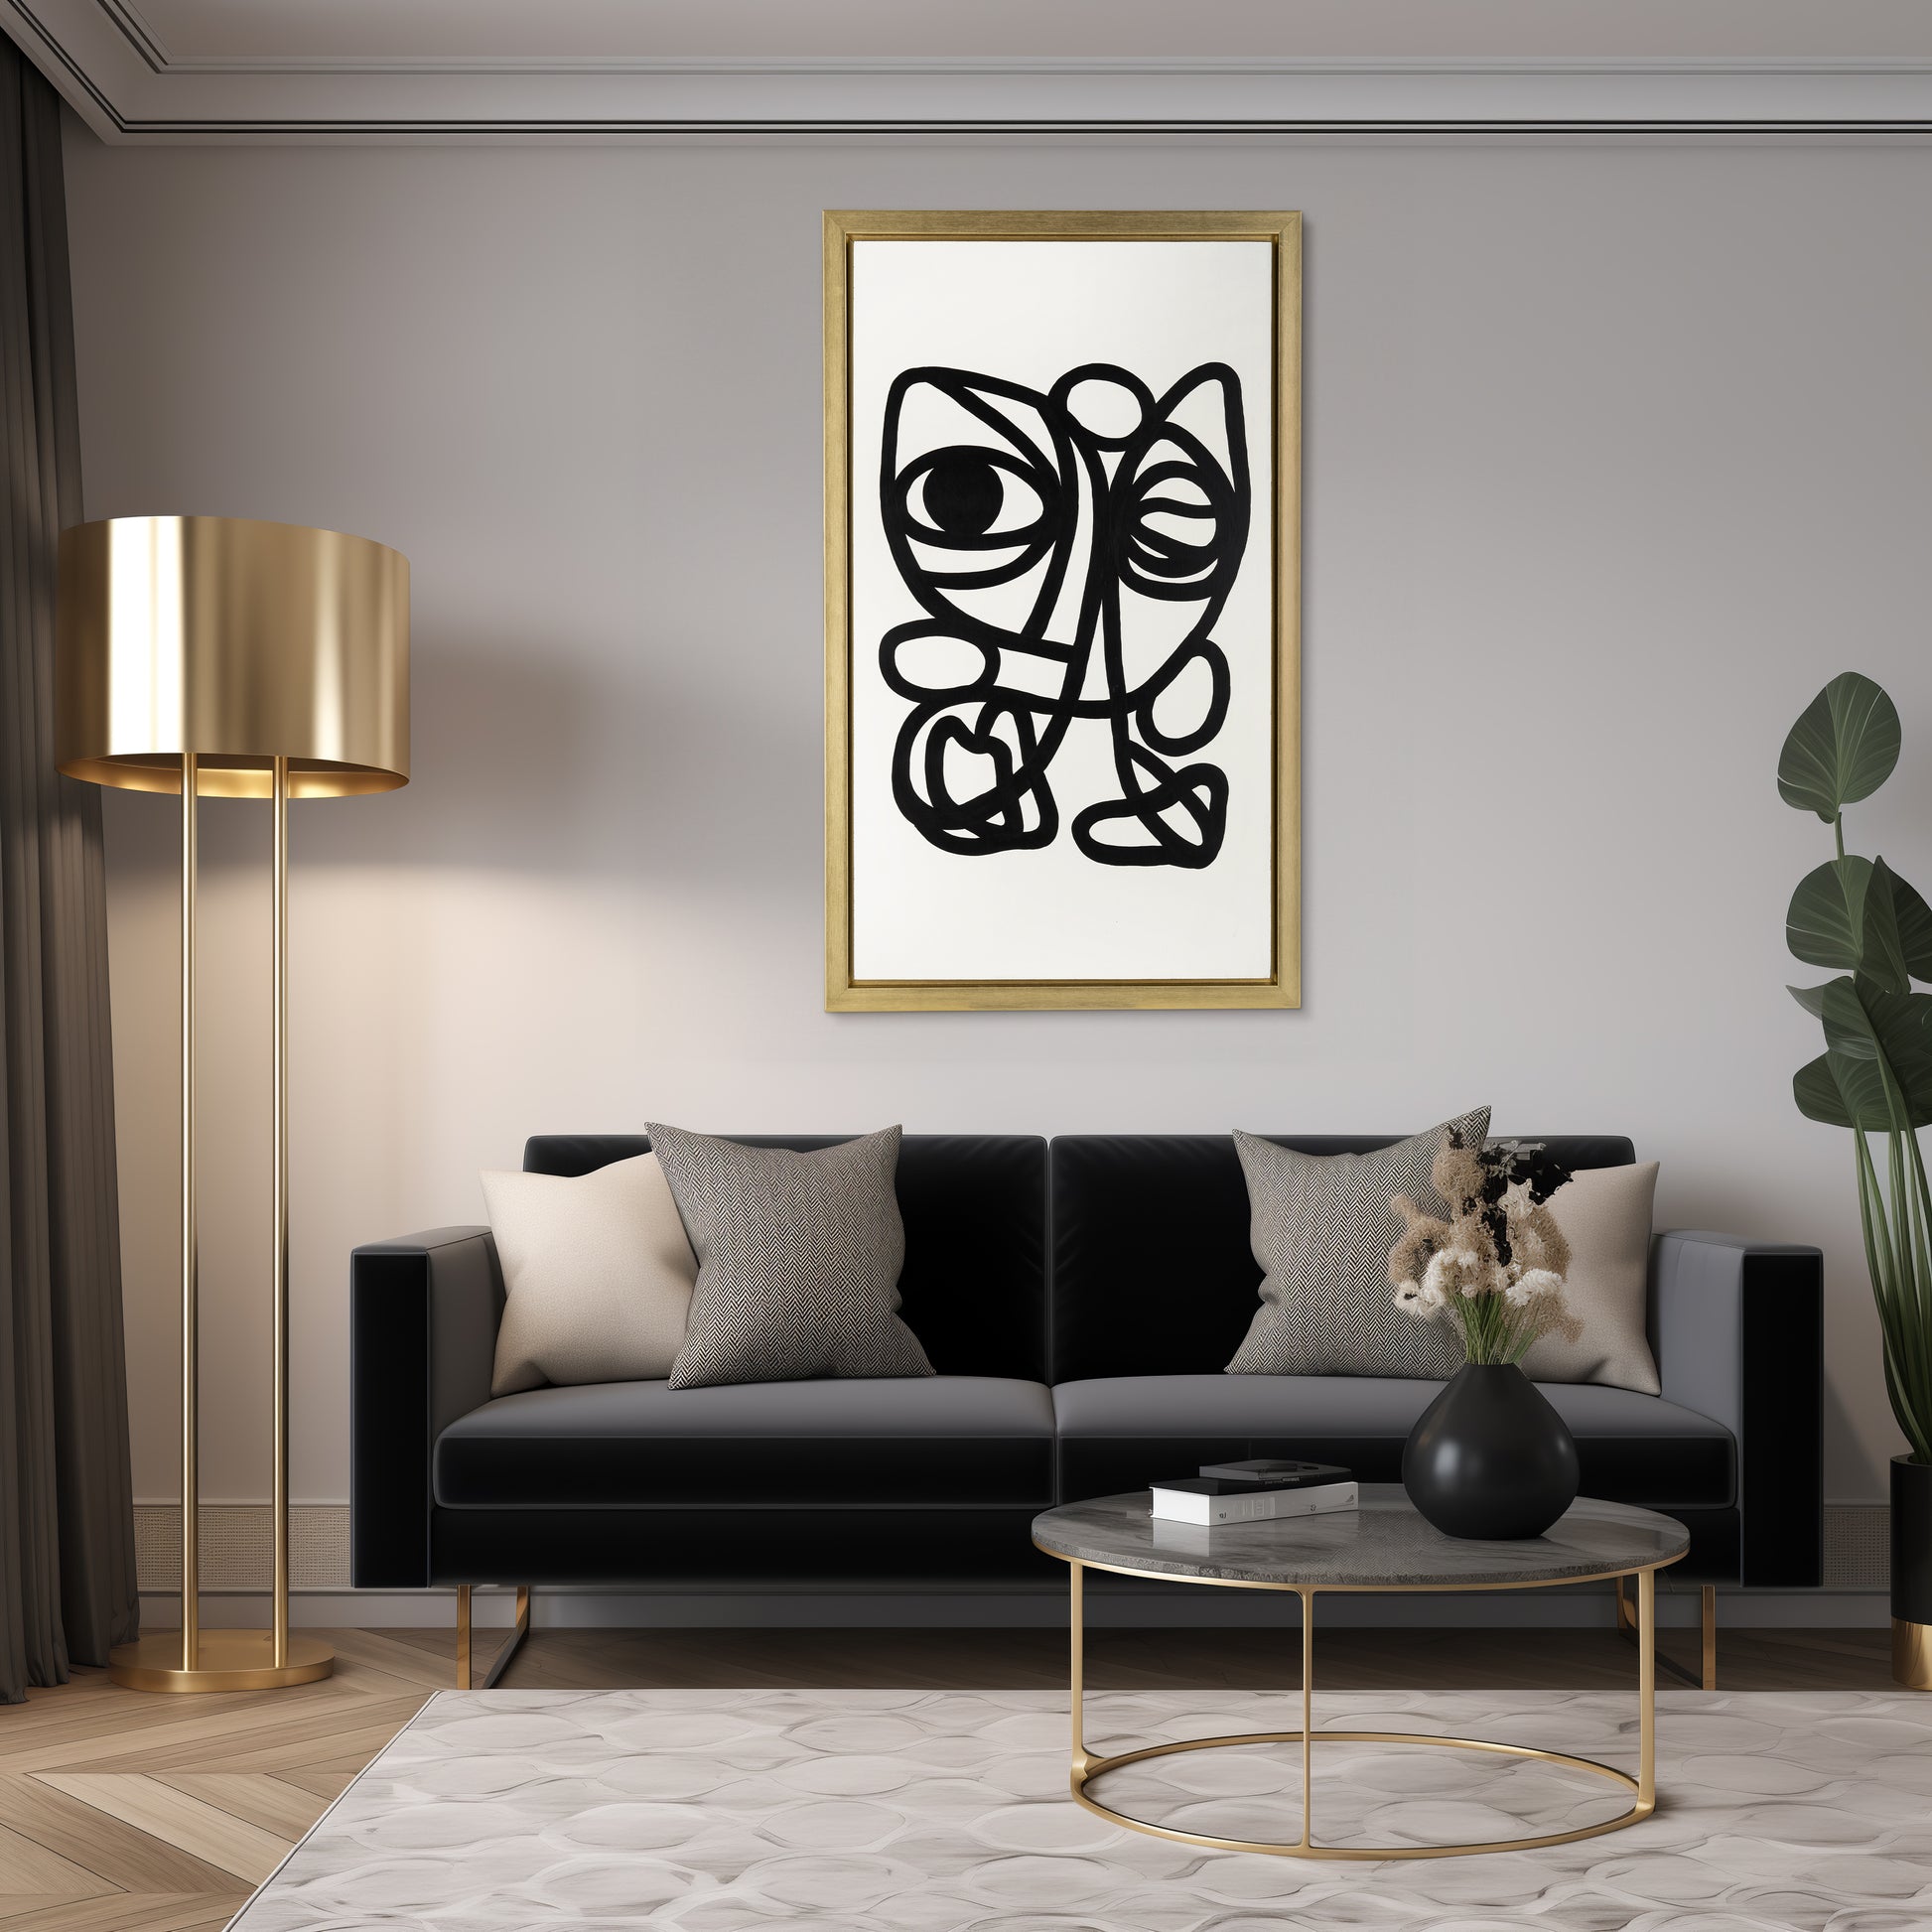 Hand Painted Gold Frame Geometric Face 35x59